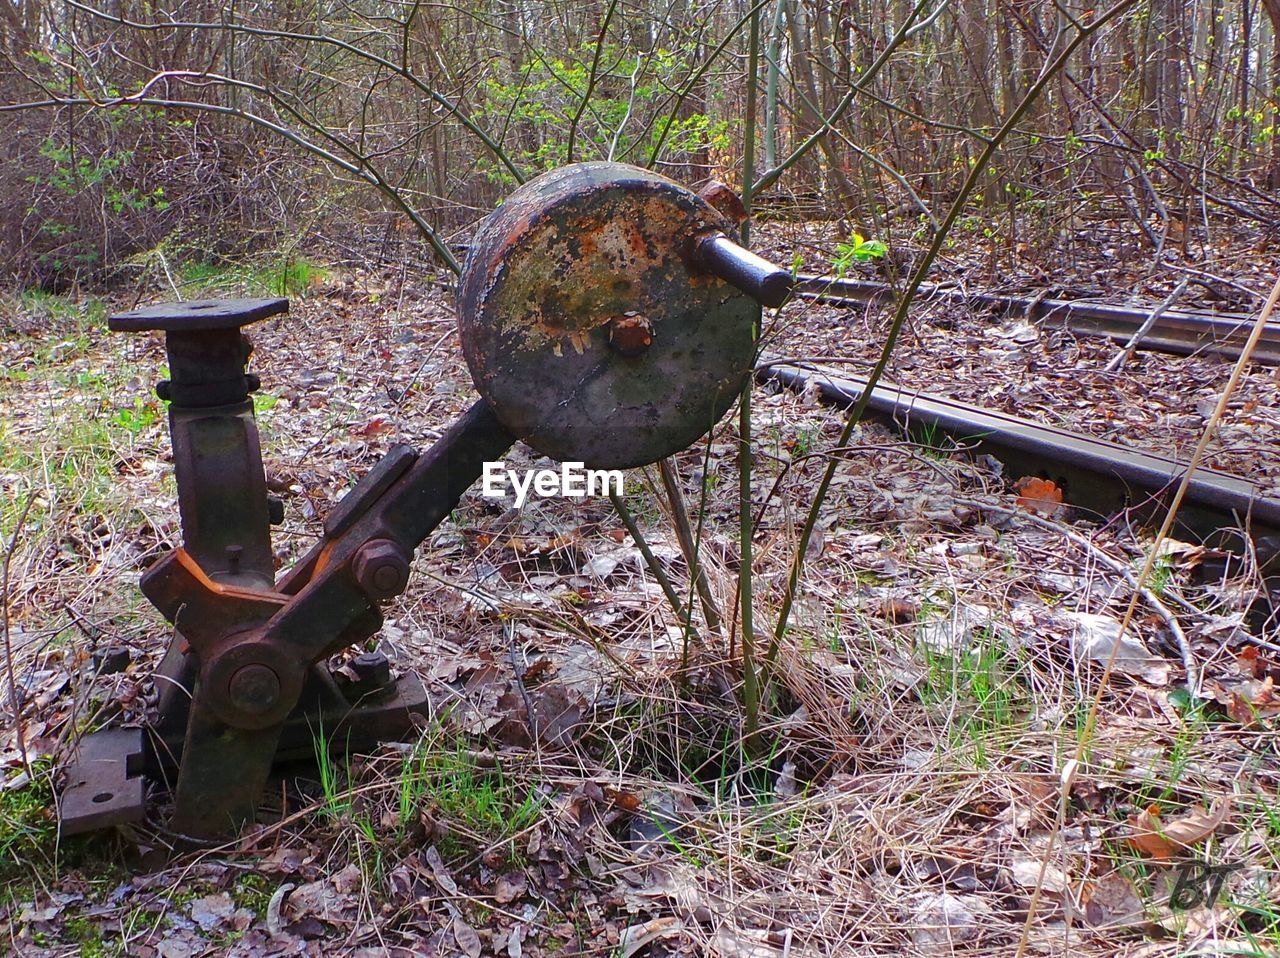 Rusty machine by railroad tack in forest